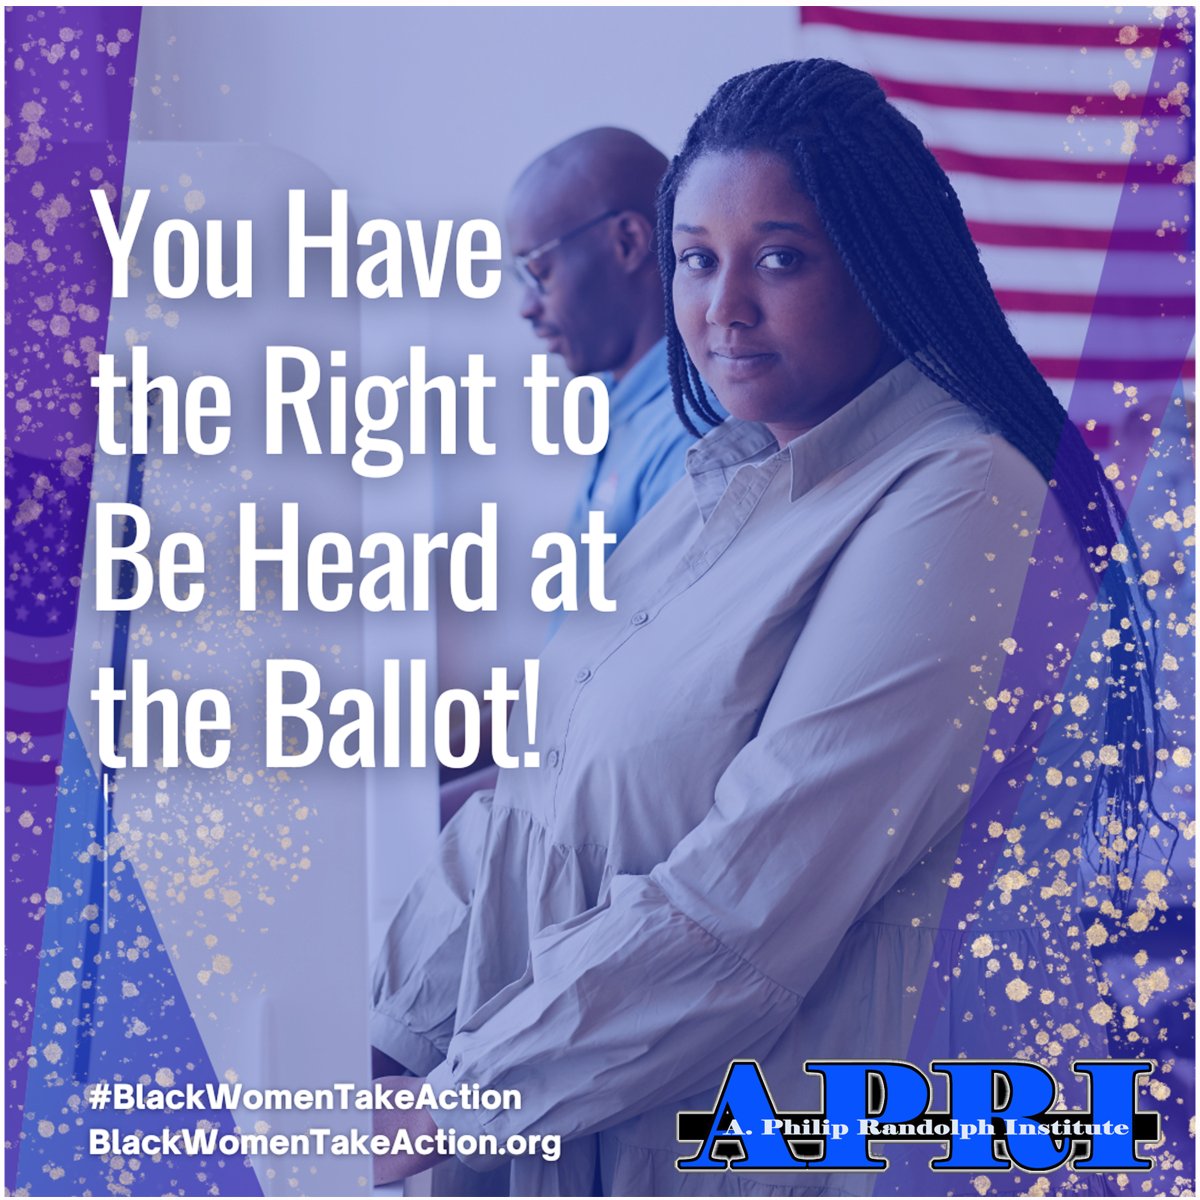 Black women and their allies are taking action to demand our freedom to vote and economic justice! Call your U.S. Senators TODAY at (202) 224-3121! Demand Congress to end the filibuster to pass federal voting rights reform NOW! #BlackWomenTakeAction #FreedomtoVote